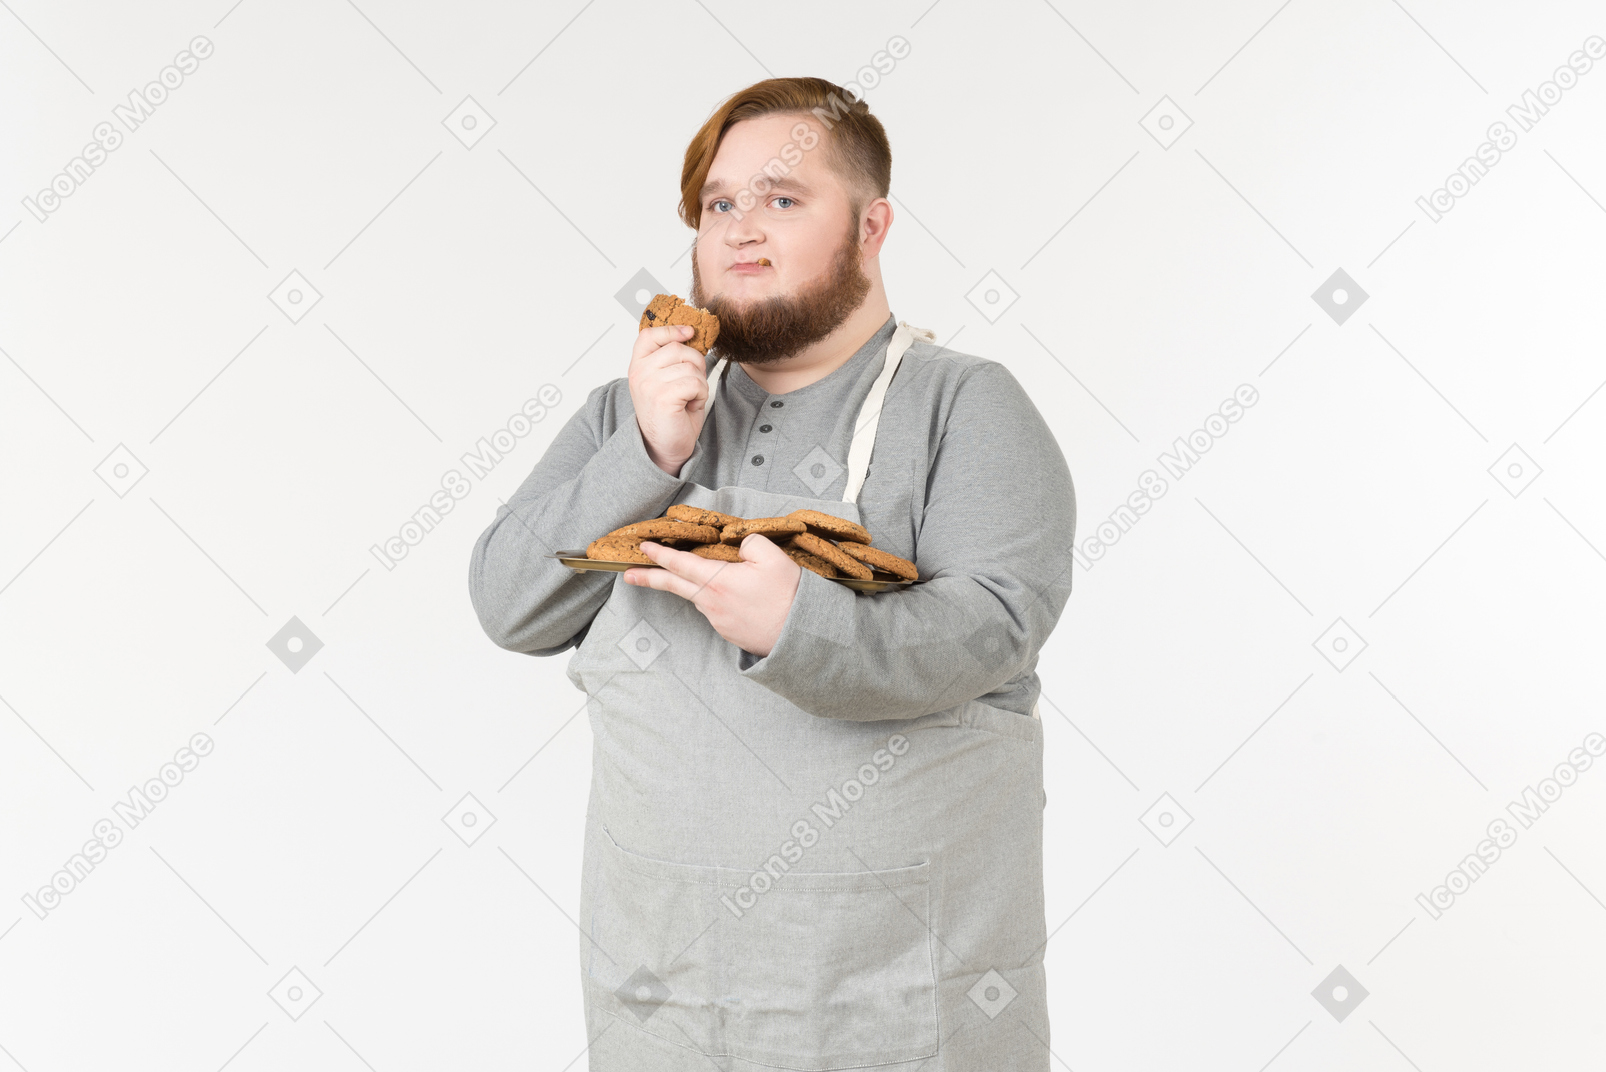 A fat man eating cookies with unpleased look